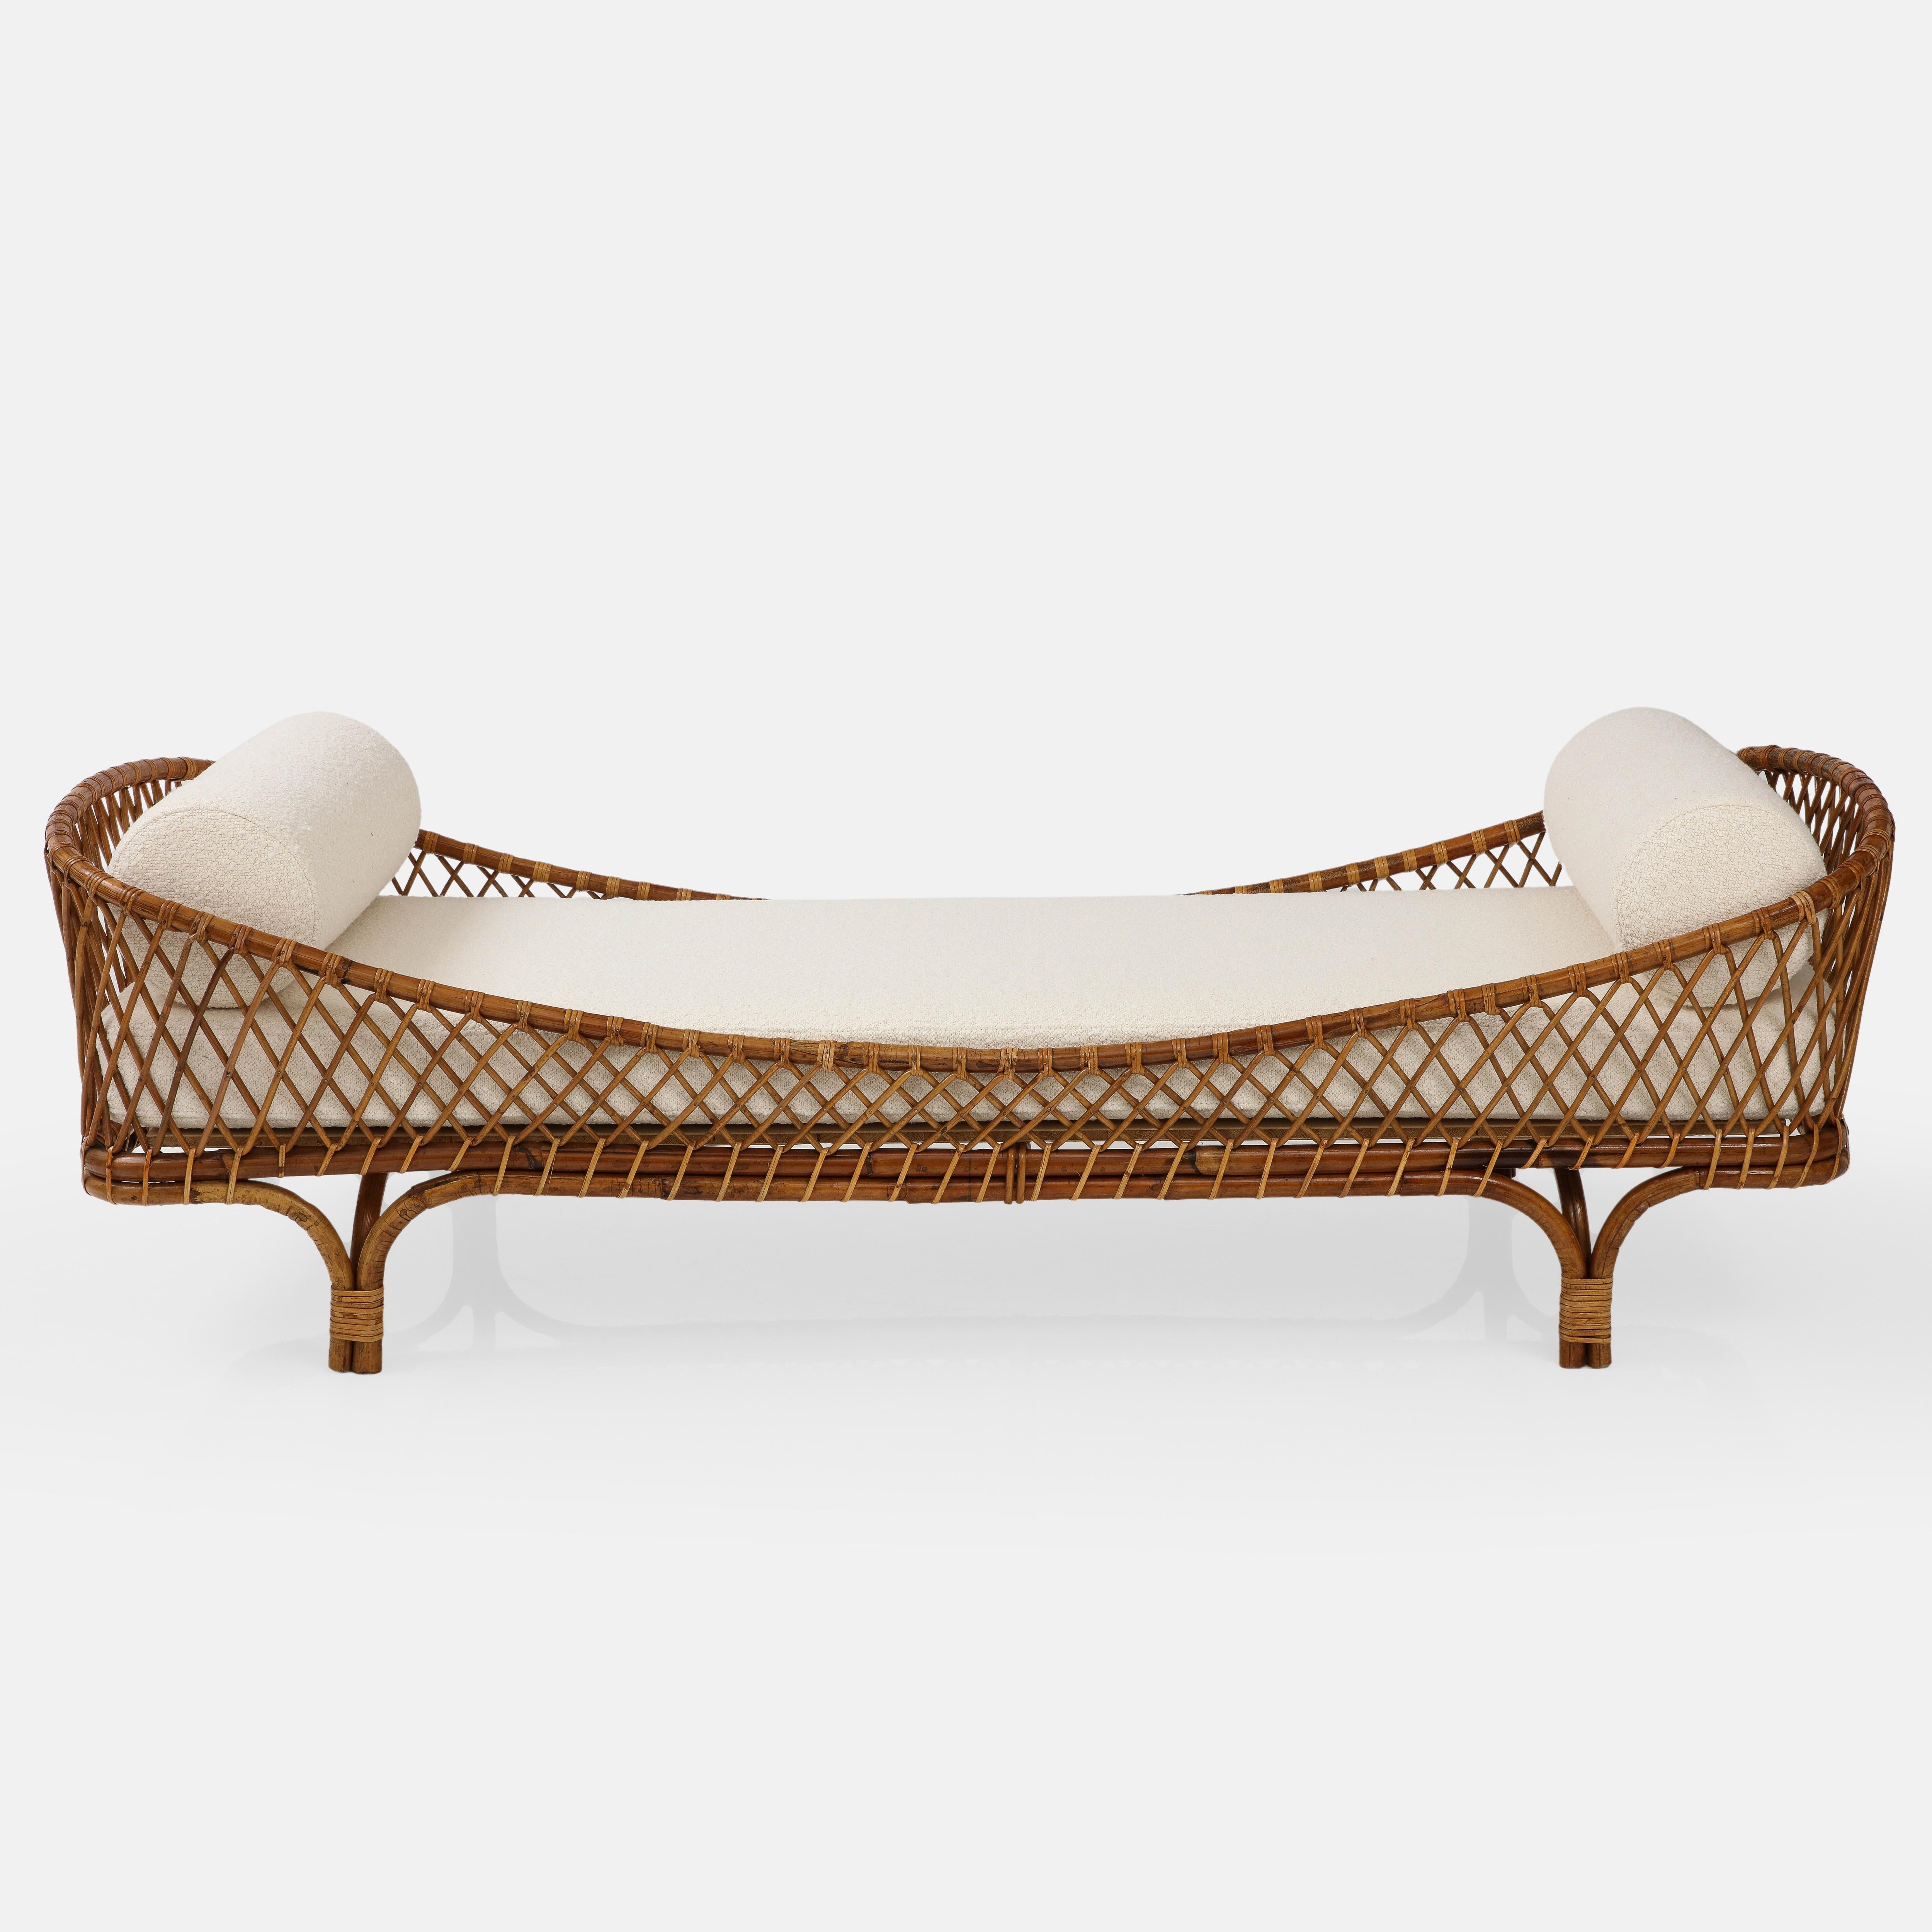 Rare Vittorio Bonacina daybed intricately hand-woven with rattan, new custom mattress and bolster pillows upholstered with ivory bouclé, Italy, 1960s.  This extremely rare and exquisite midcentury Bonacina daybed is handmade using the highest